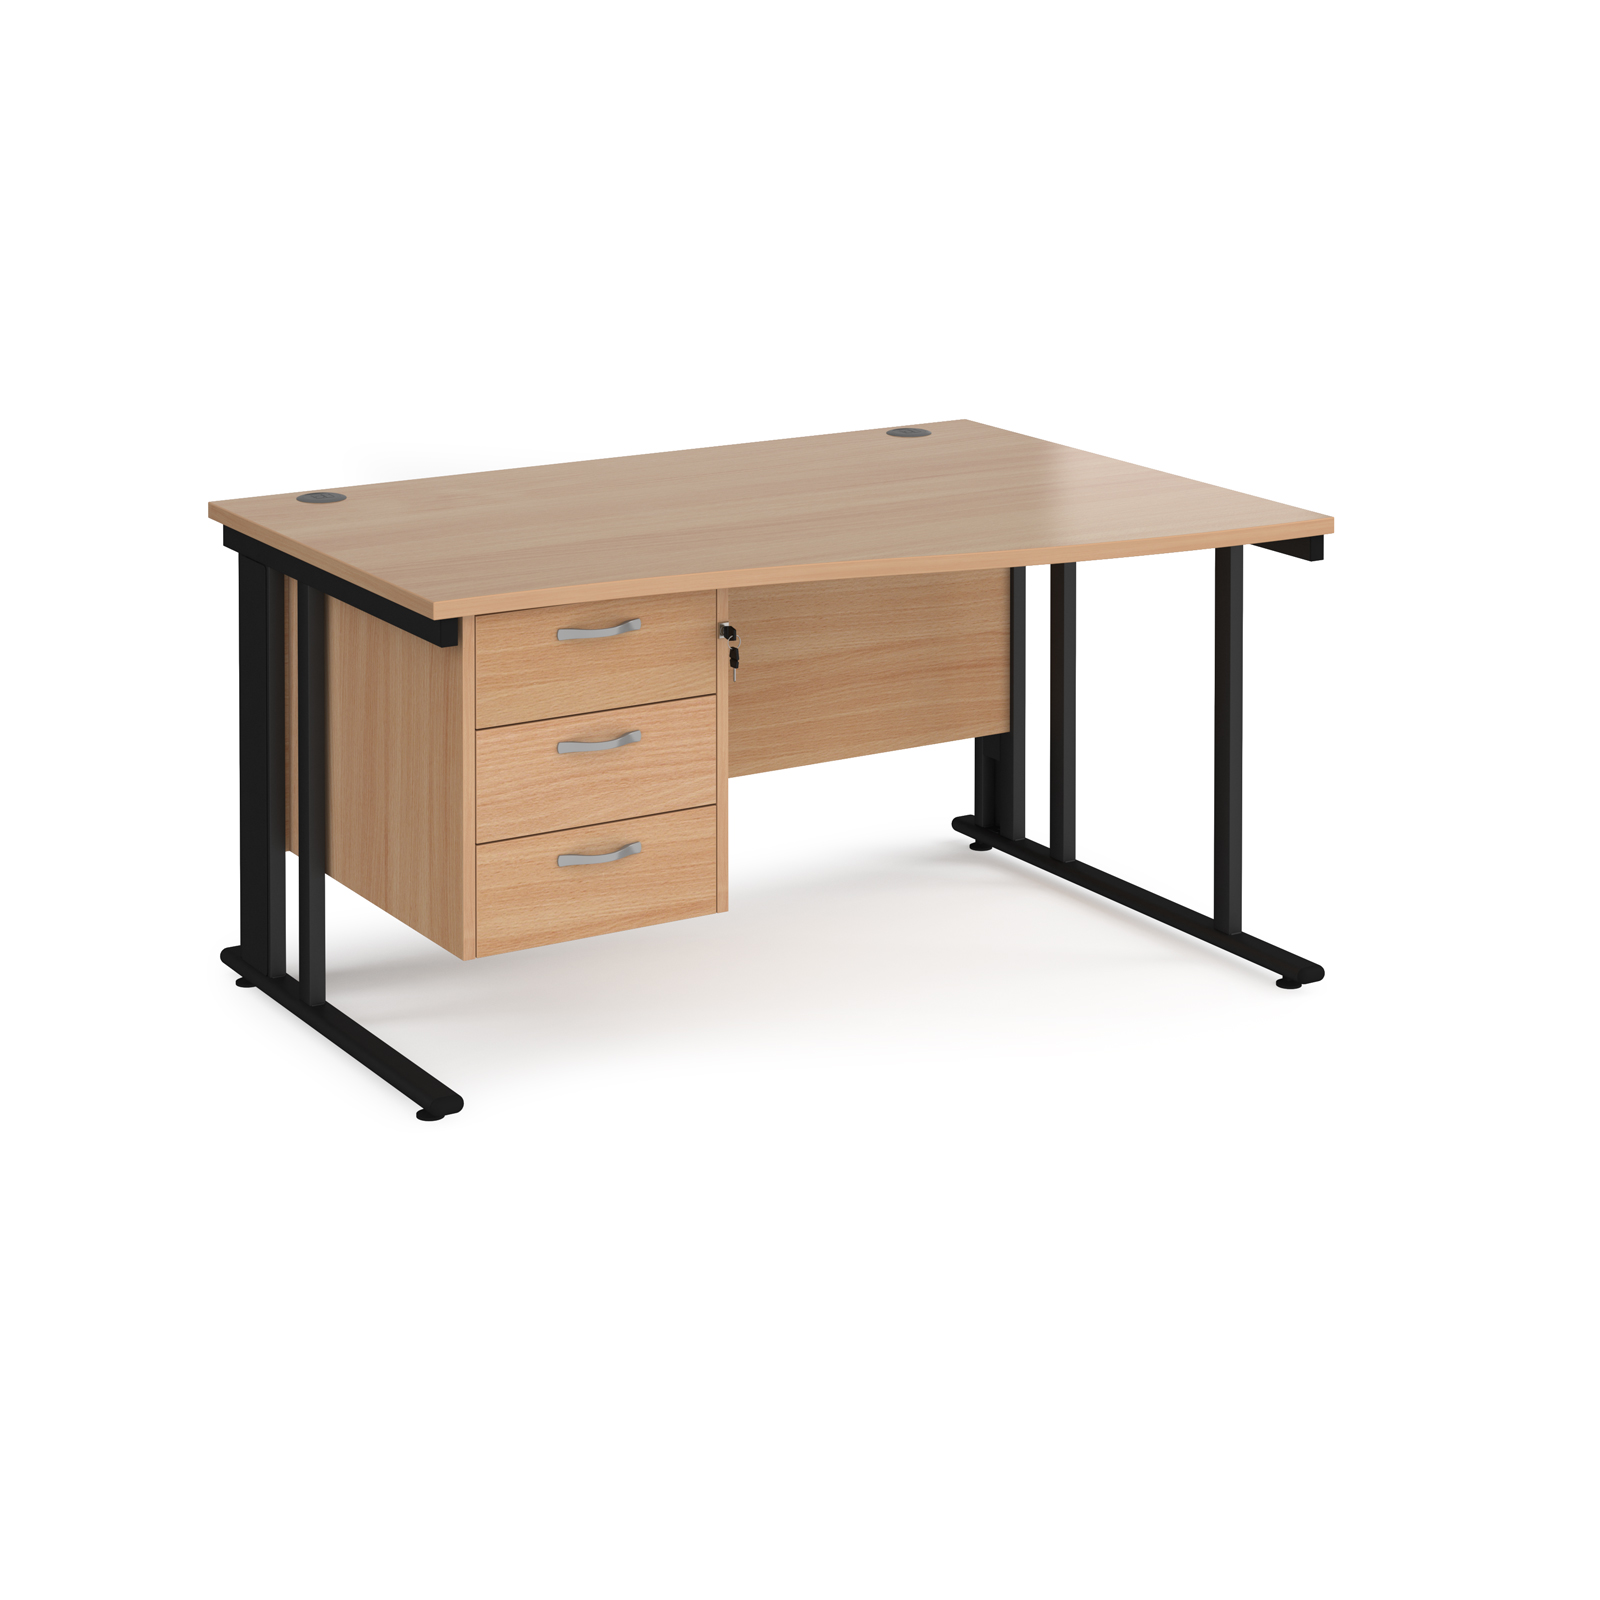 Maestro 25 right hand wave desk 1400mm wide with 3 drawer pedestal - black cable managed leg frame, beech top